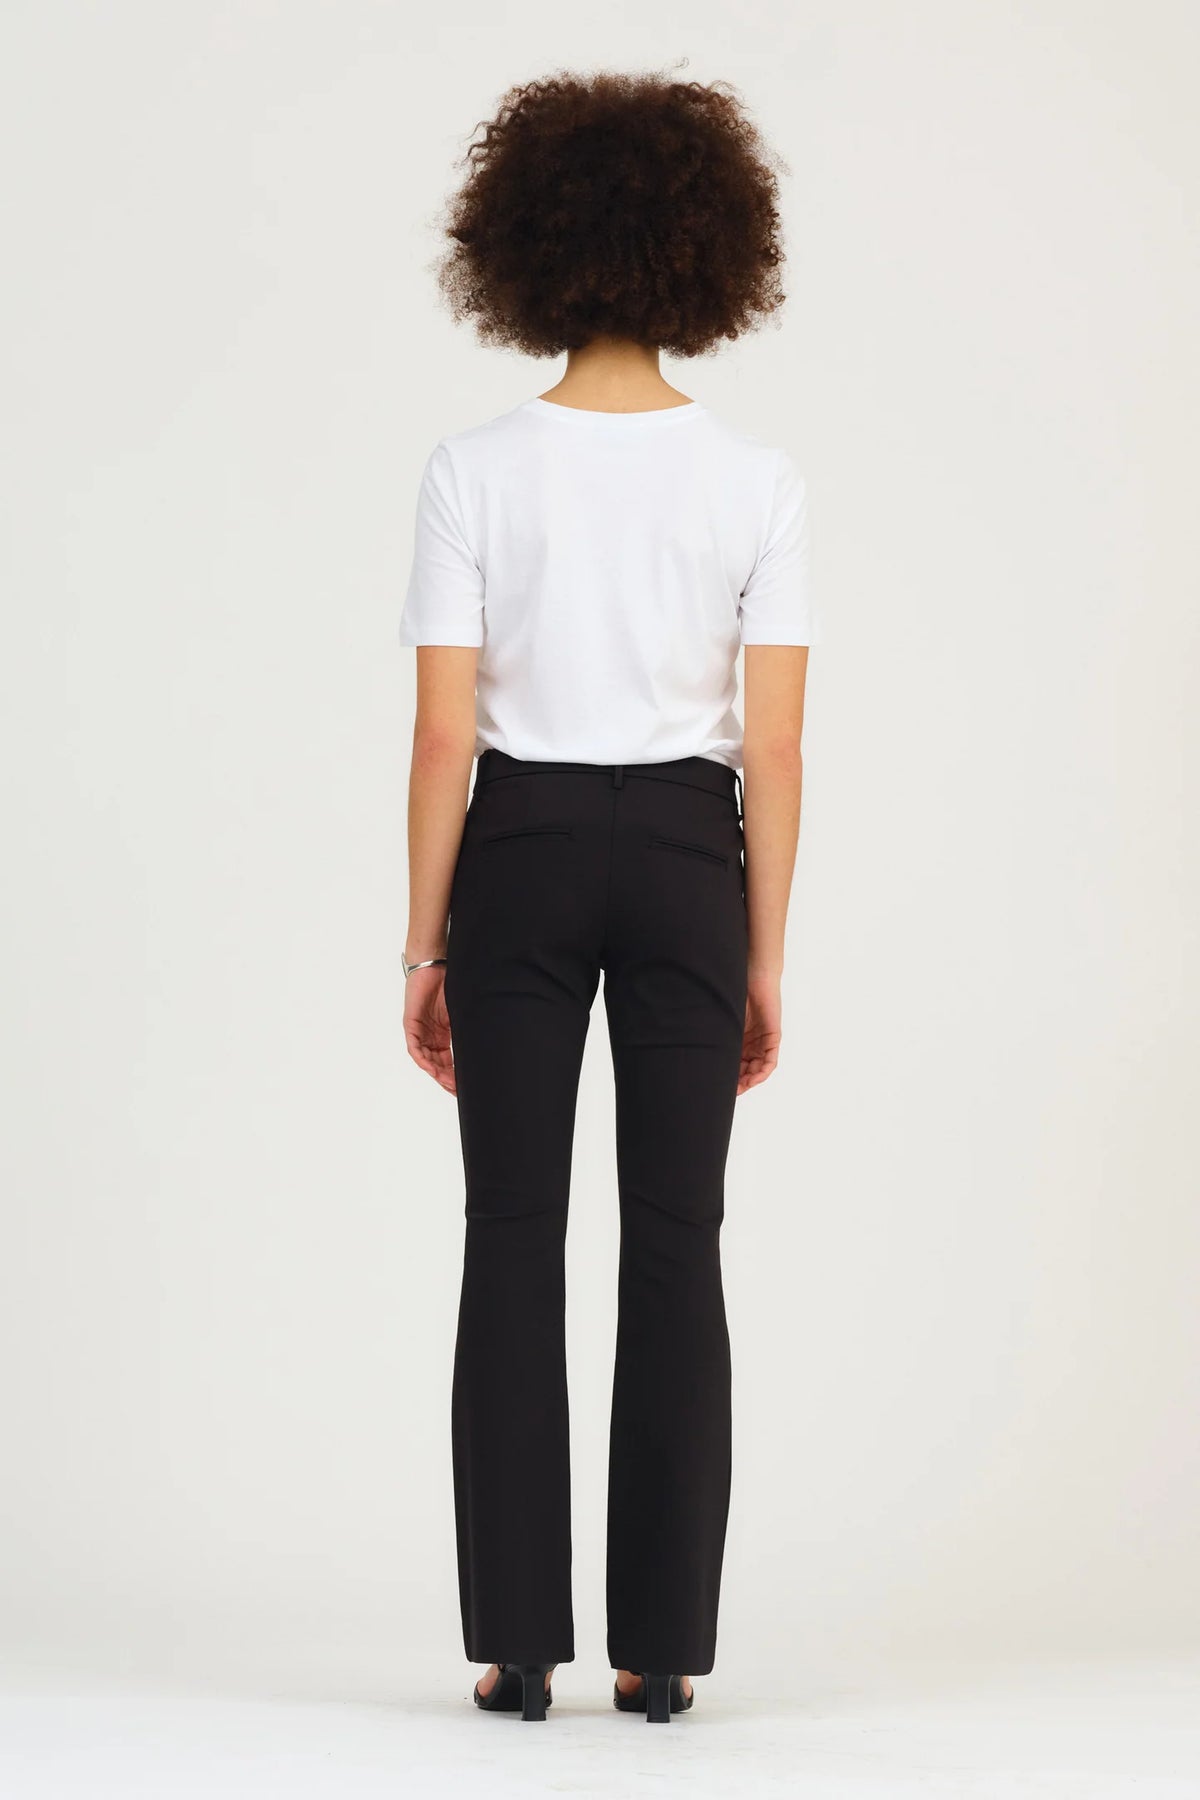 IVY Alice Flare Pant